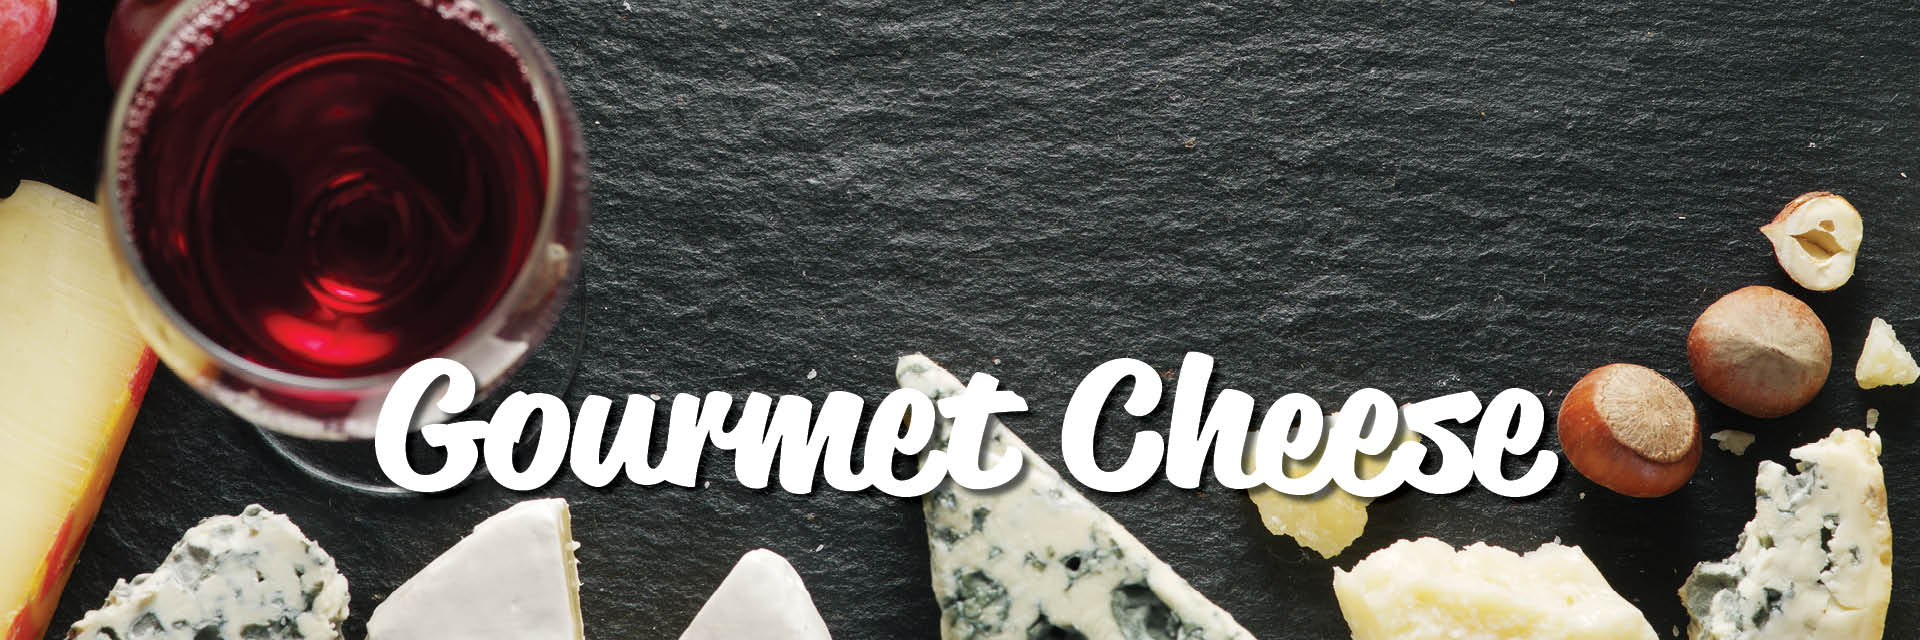 Gourmet Cheese at West Seattle Thriftway